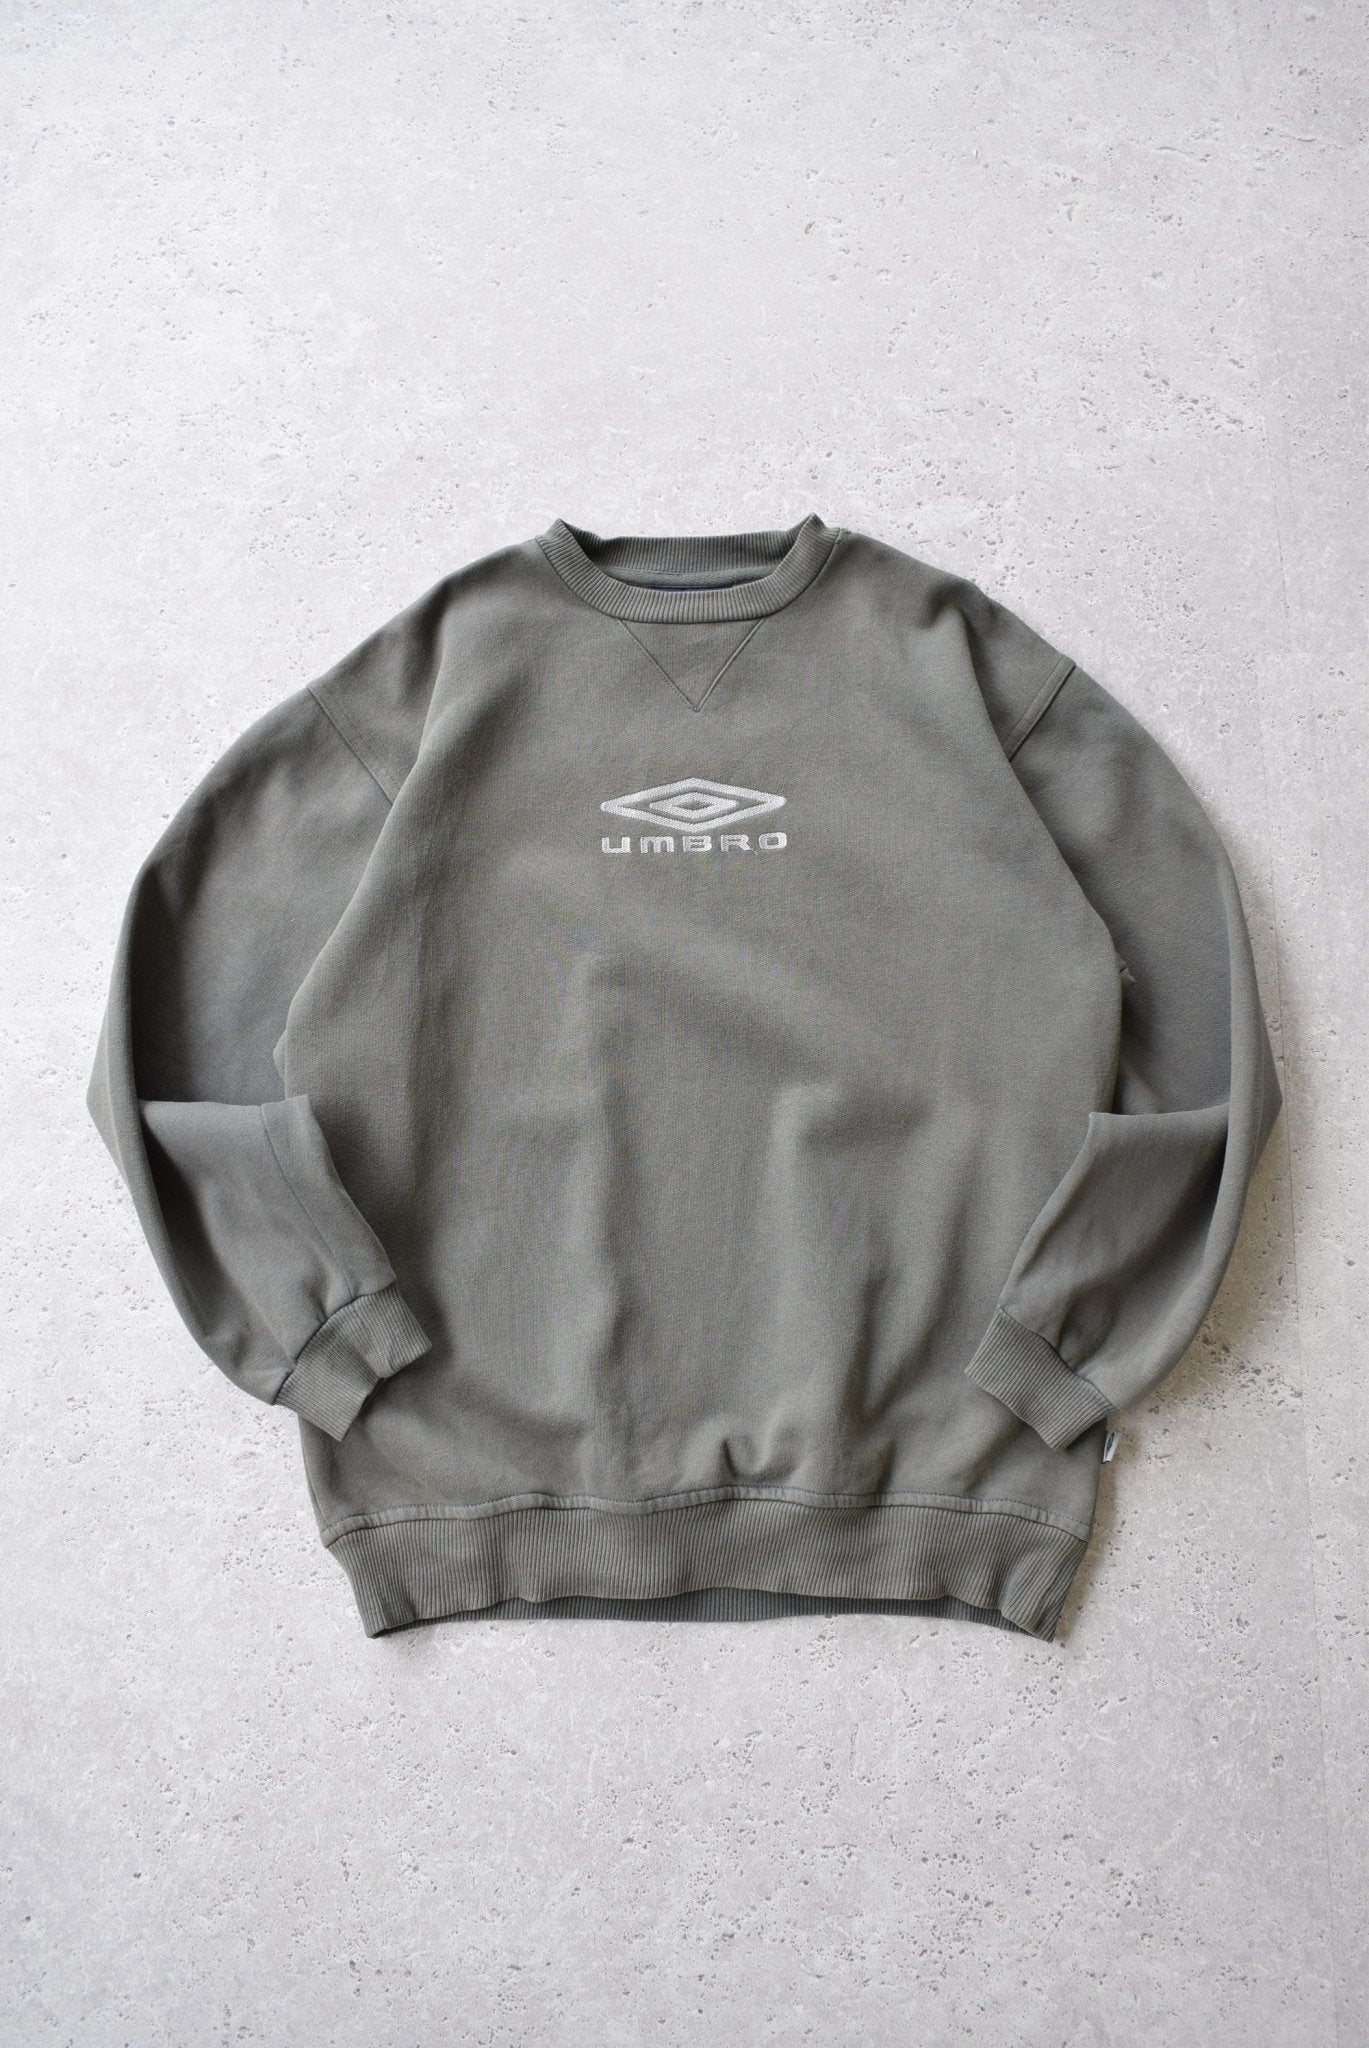 Vintage Umbro Embroidered Spellout Sweater (S) - Retrospective Store